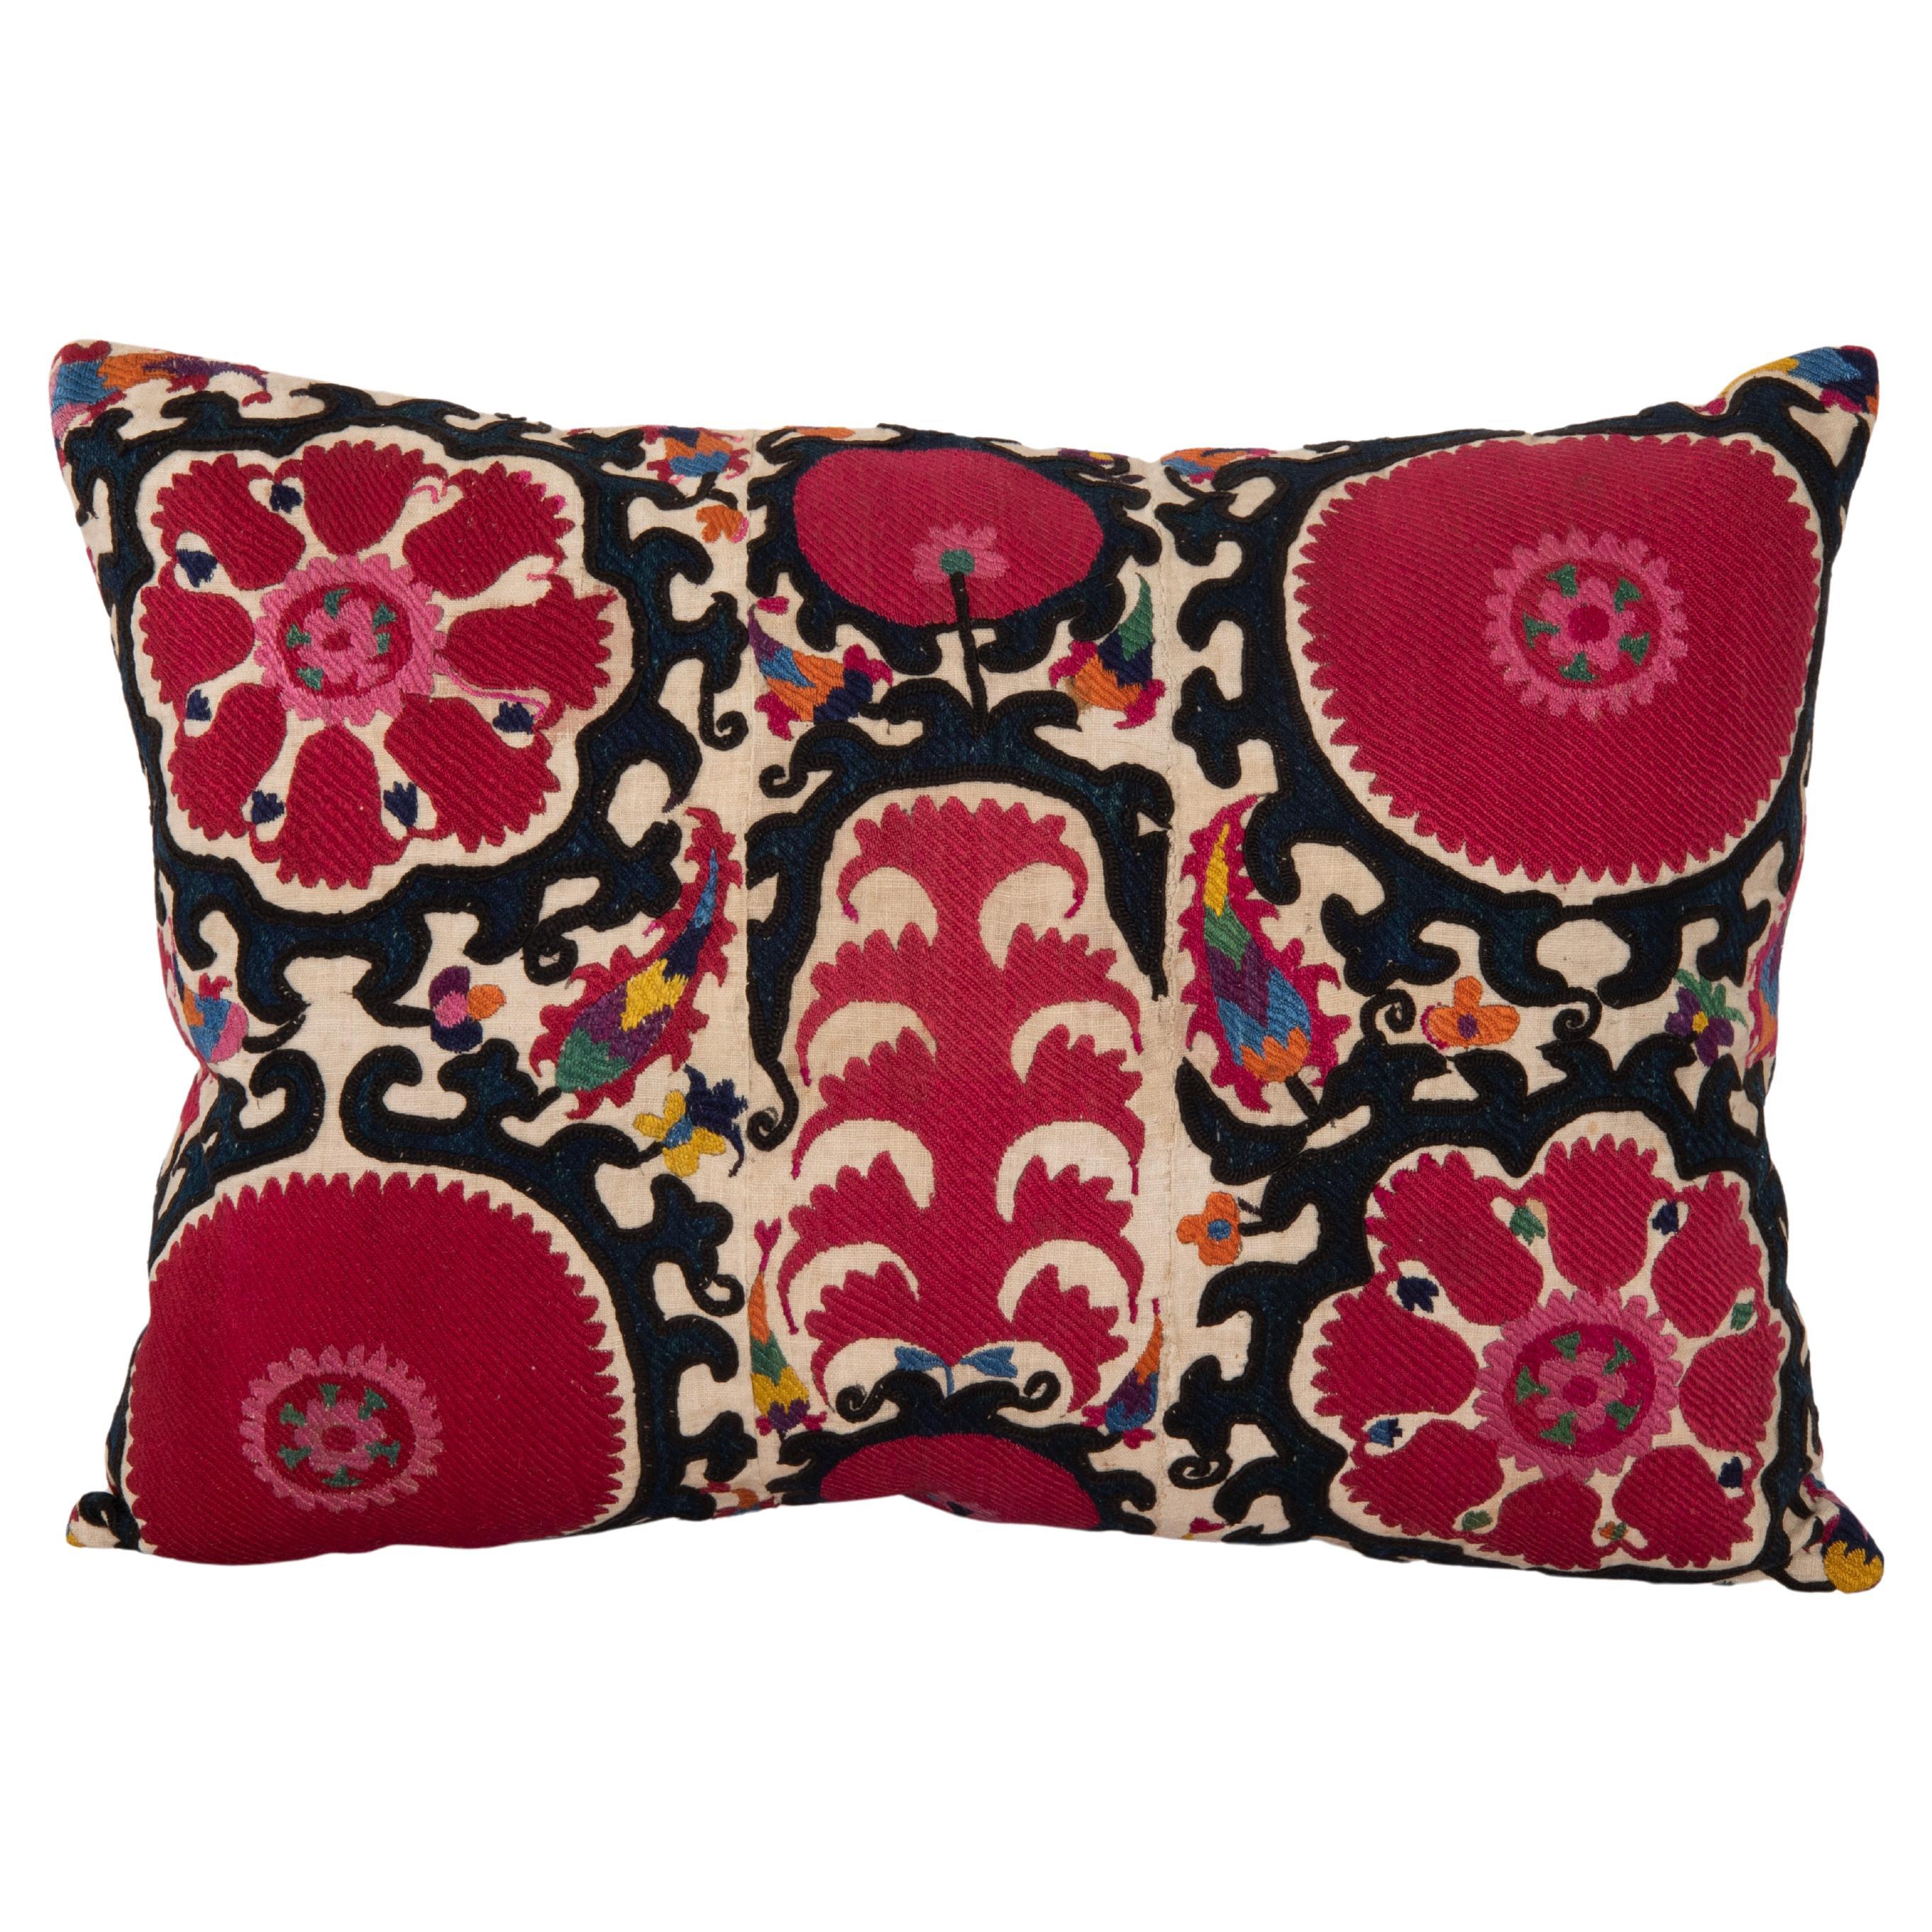 Antique Suzani Pillow Cover, Made from a late 19th C. Tajik Suzani For Sale